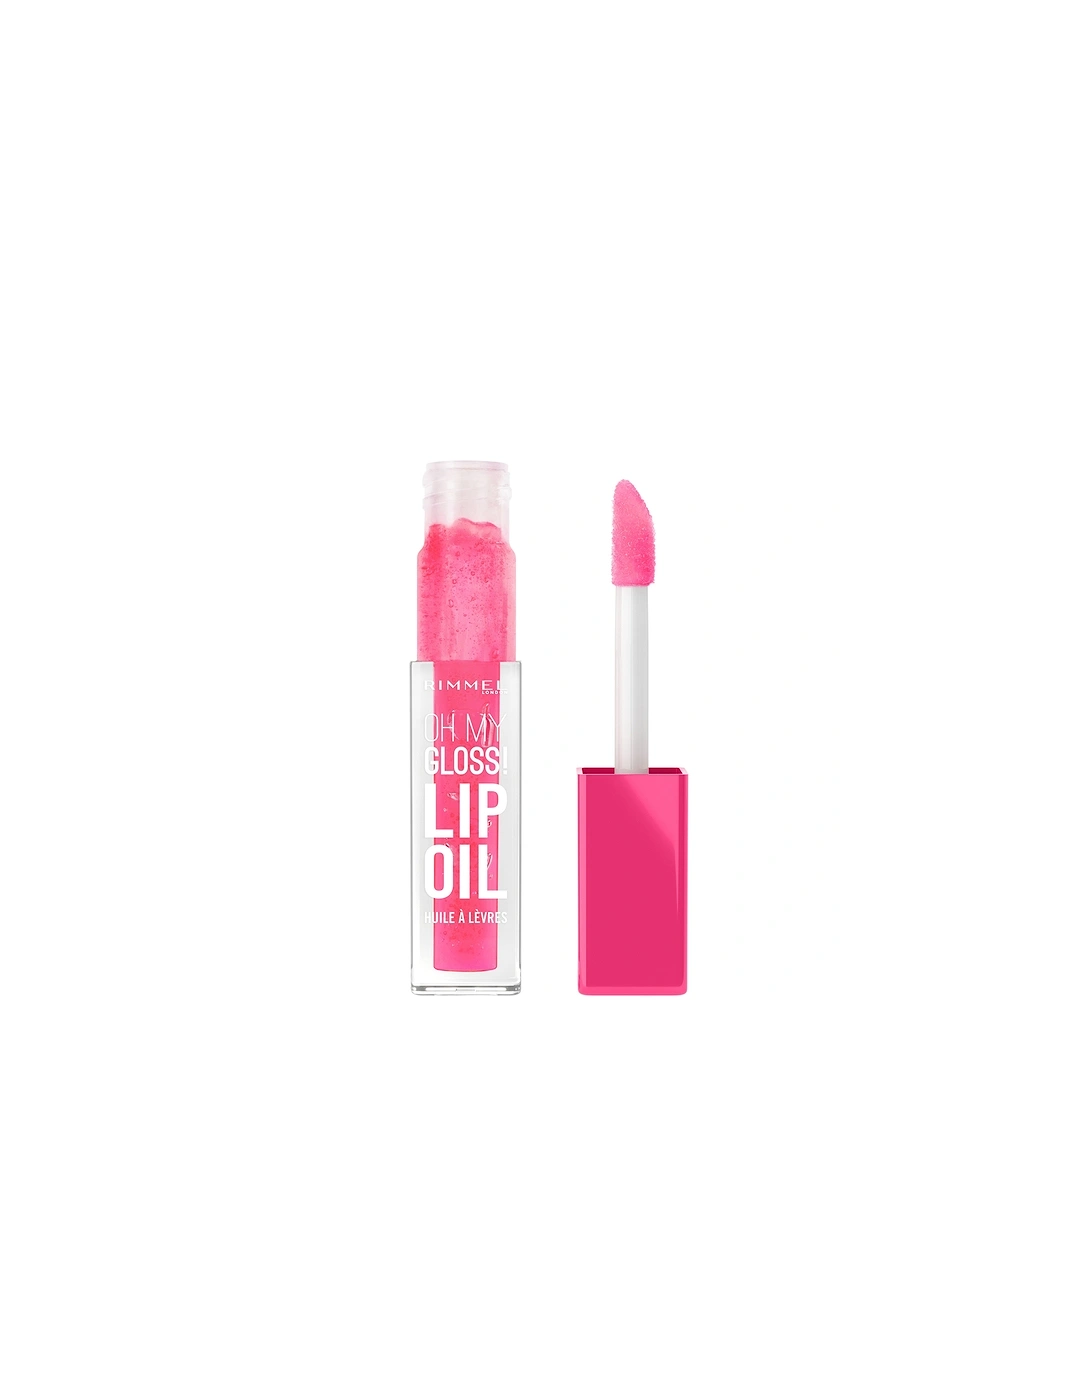 Oh My Gloss! Lip Oil - 004 - Vivid Red, 2 of 1